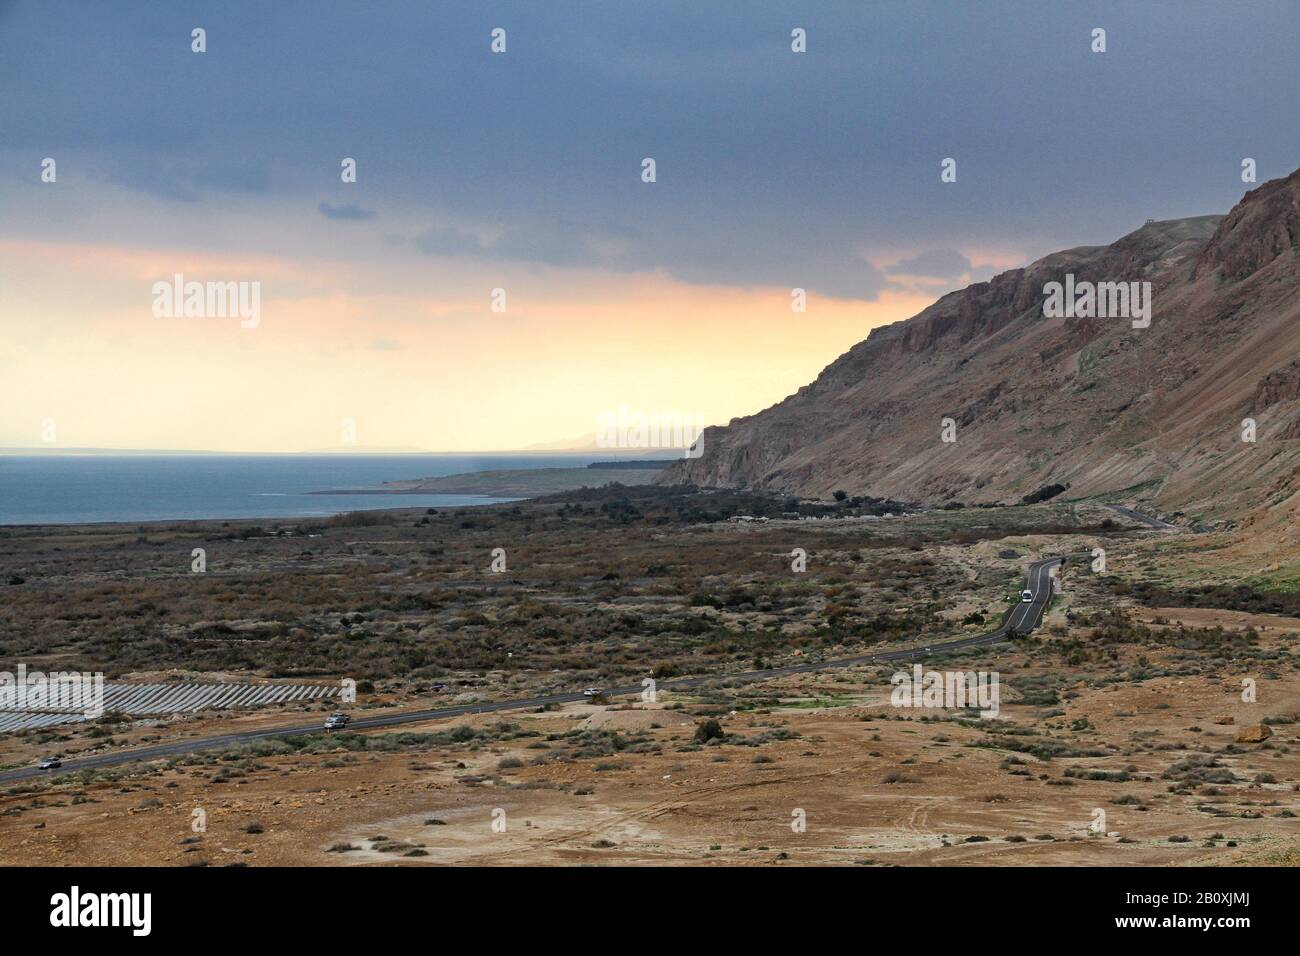 Standing at Qumran National Park offers a panoramic view of the Dead Sea and the surrounding mountains and desert along Highway 90 in Israel. Stock Photo